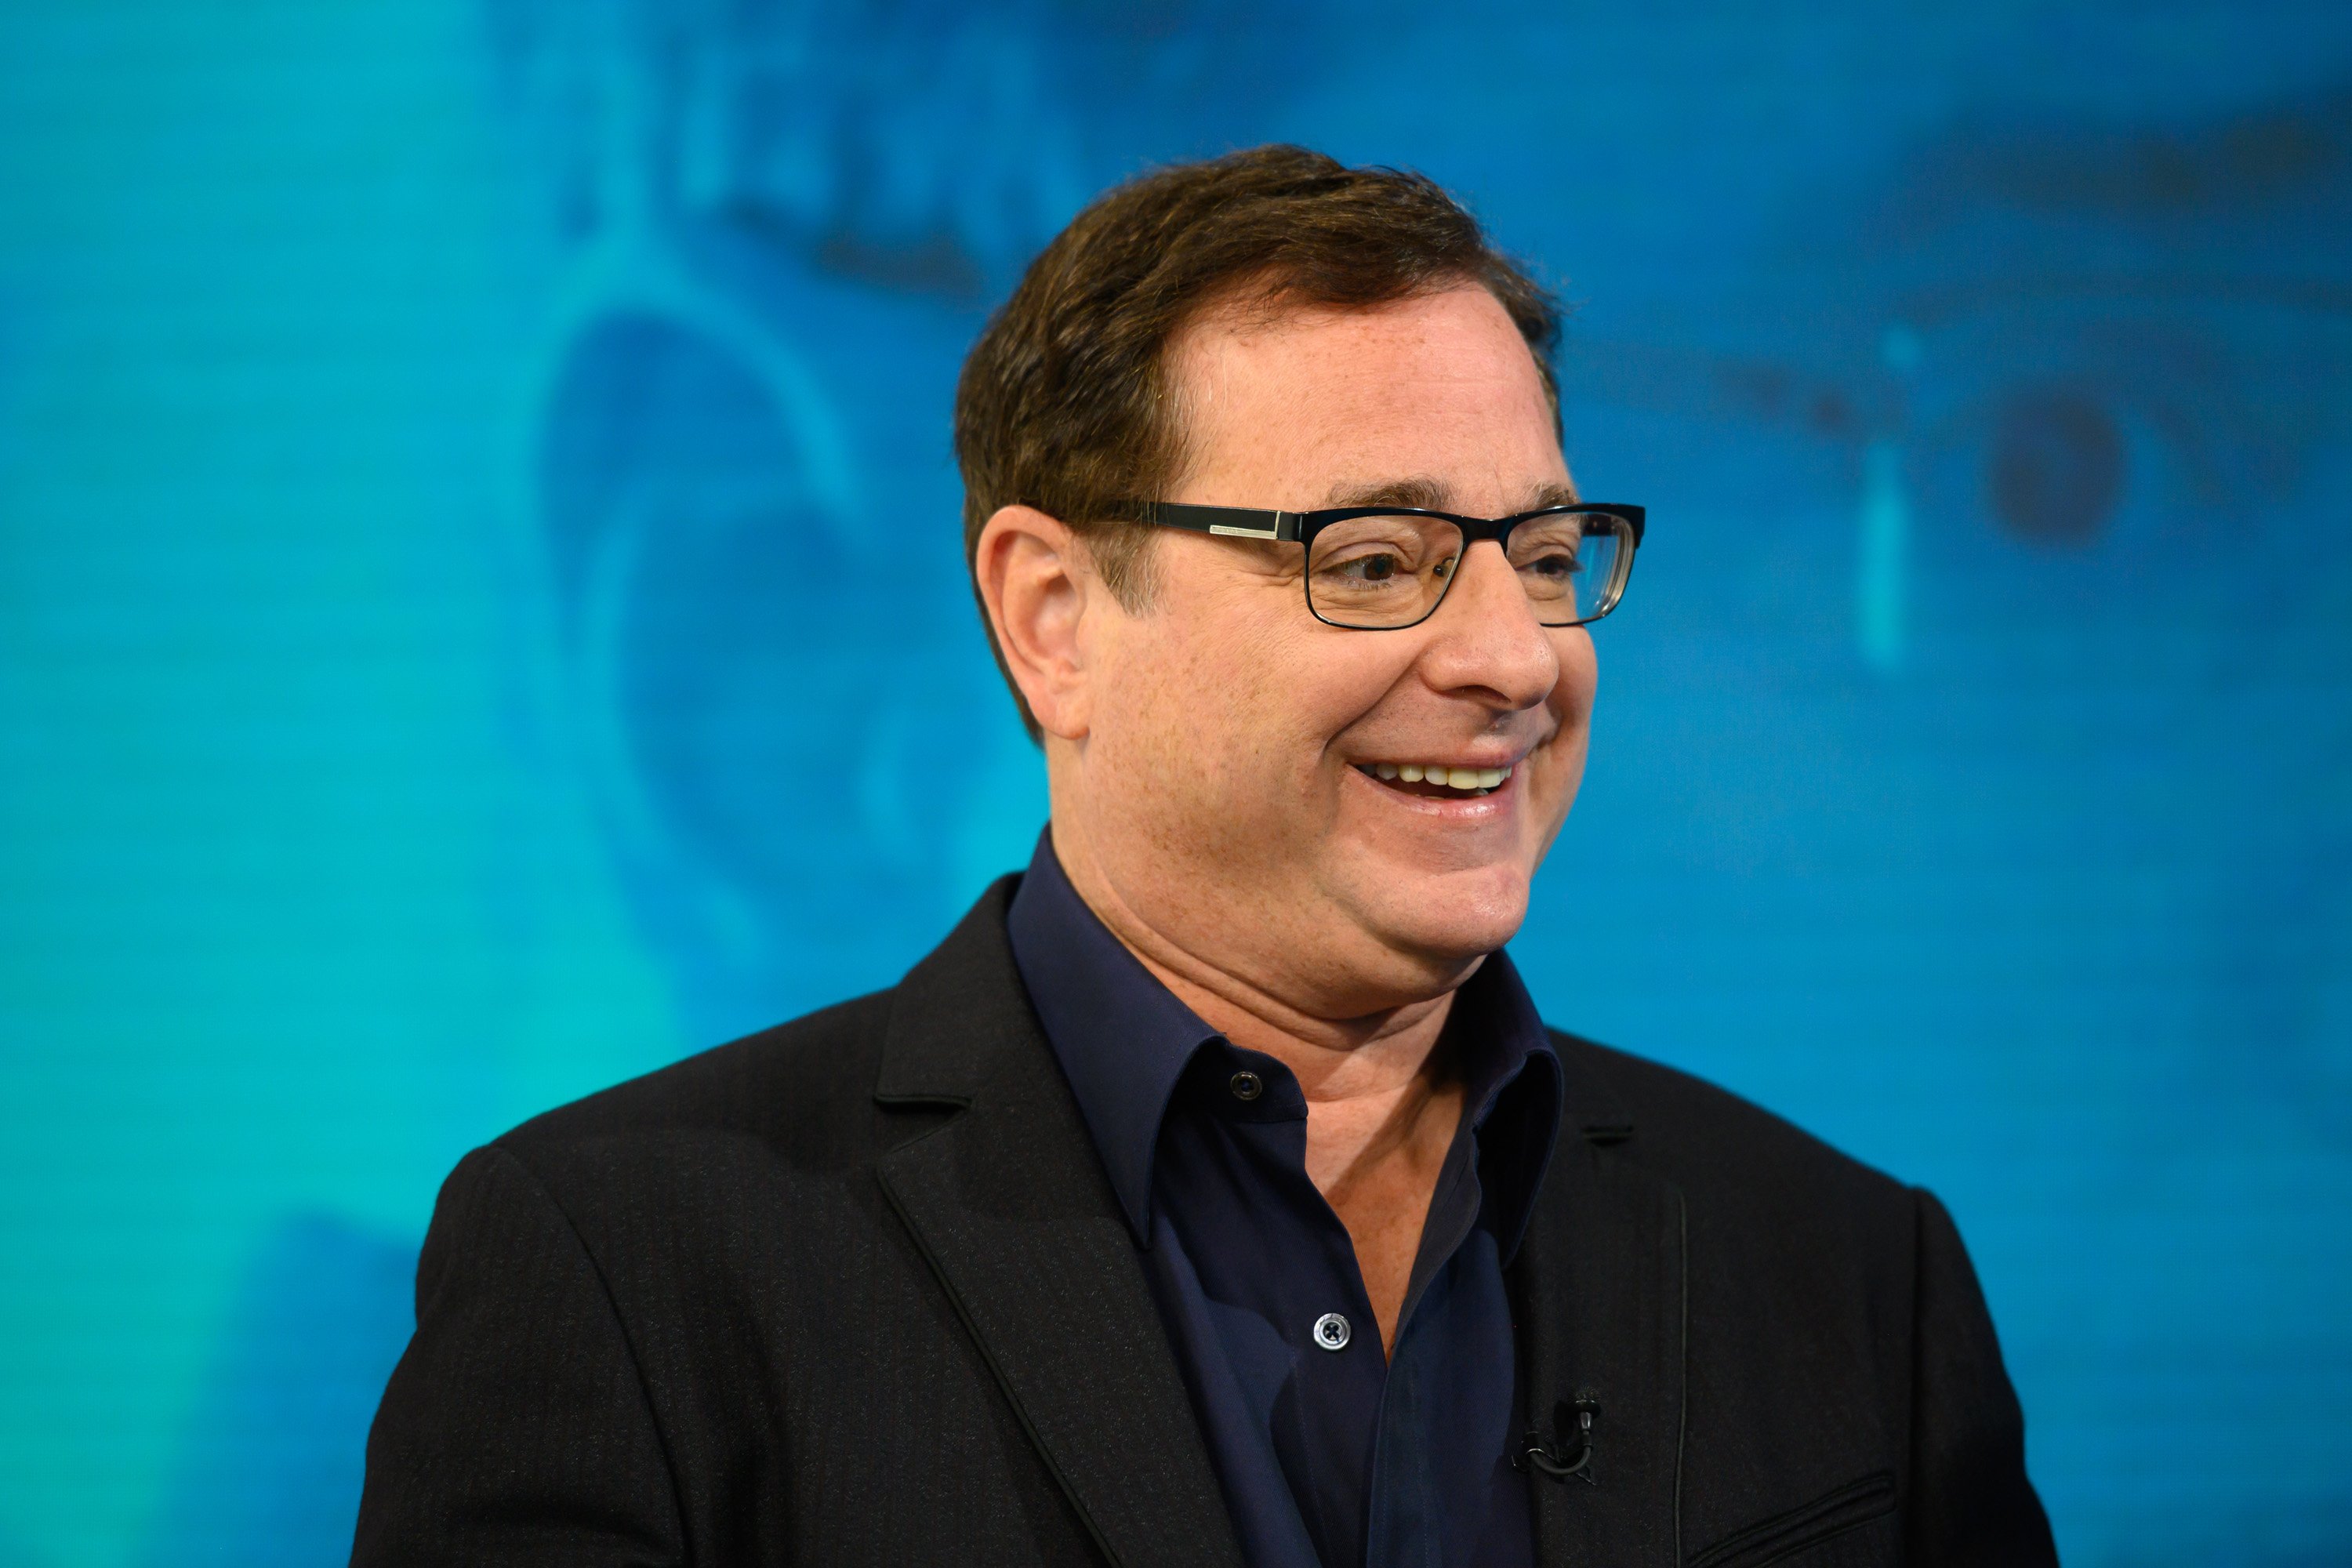 Bob Saget as a guest on "Today" Season 68, April 23, 2019. | Source: Getty Images